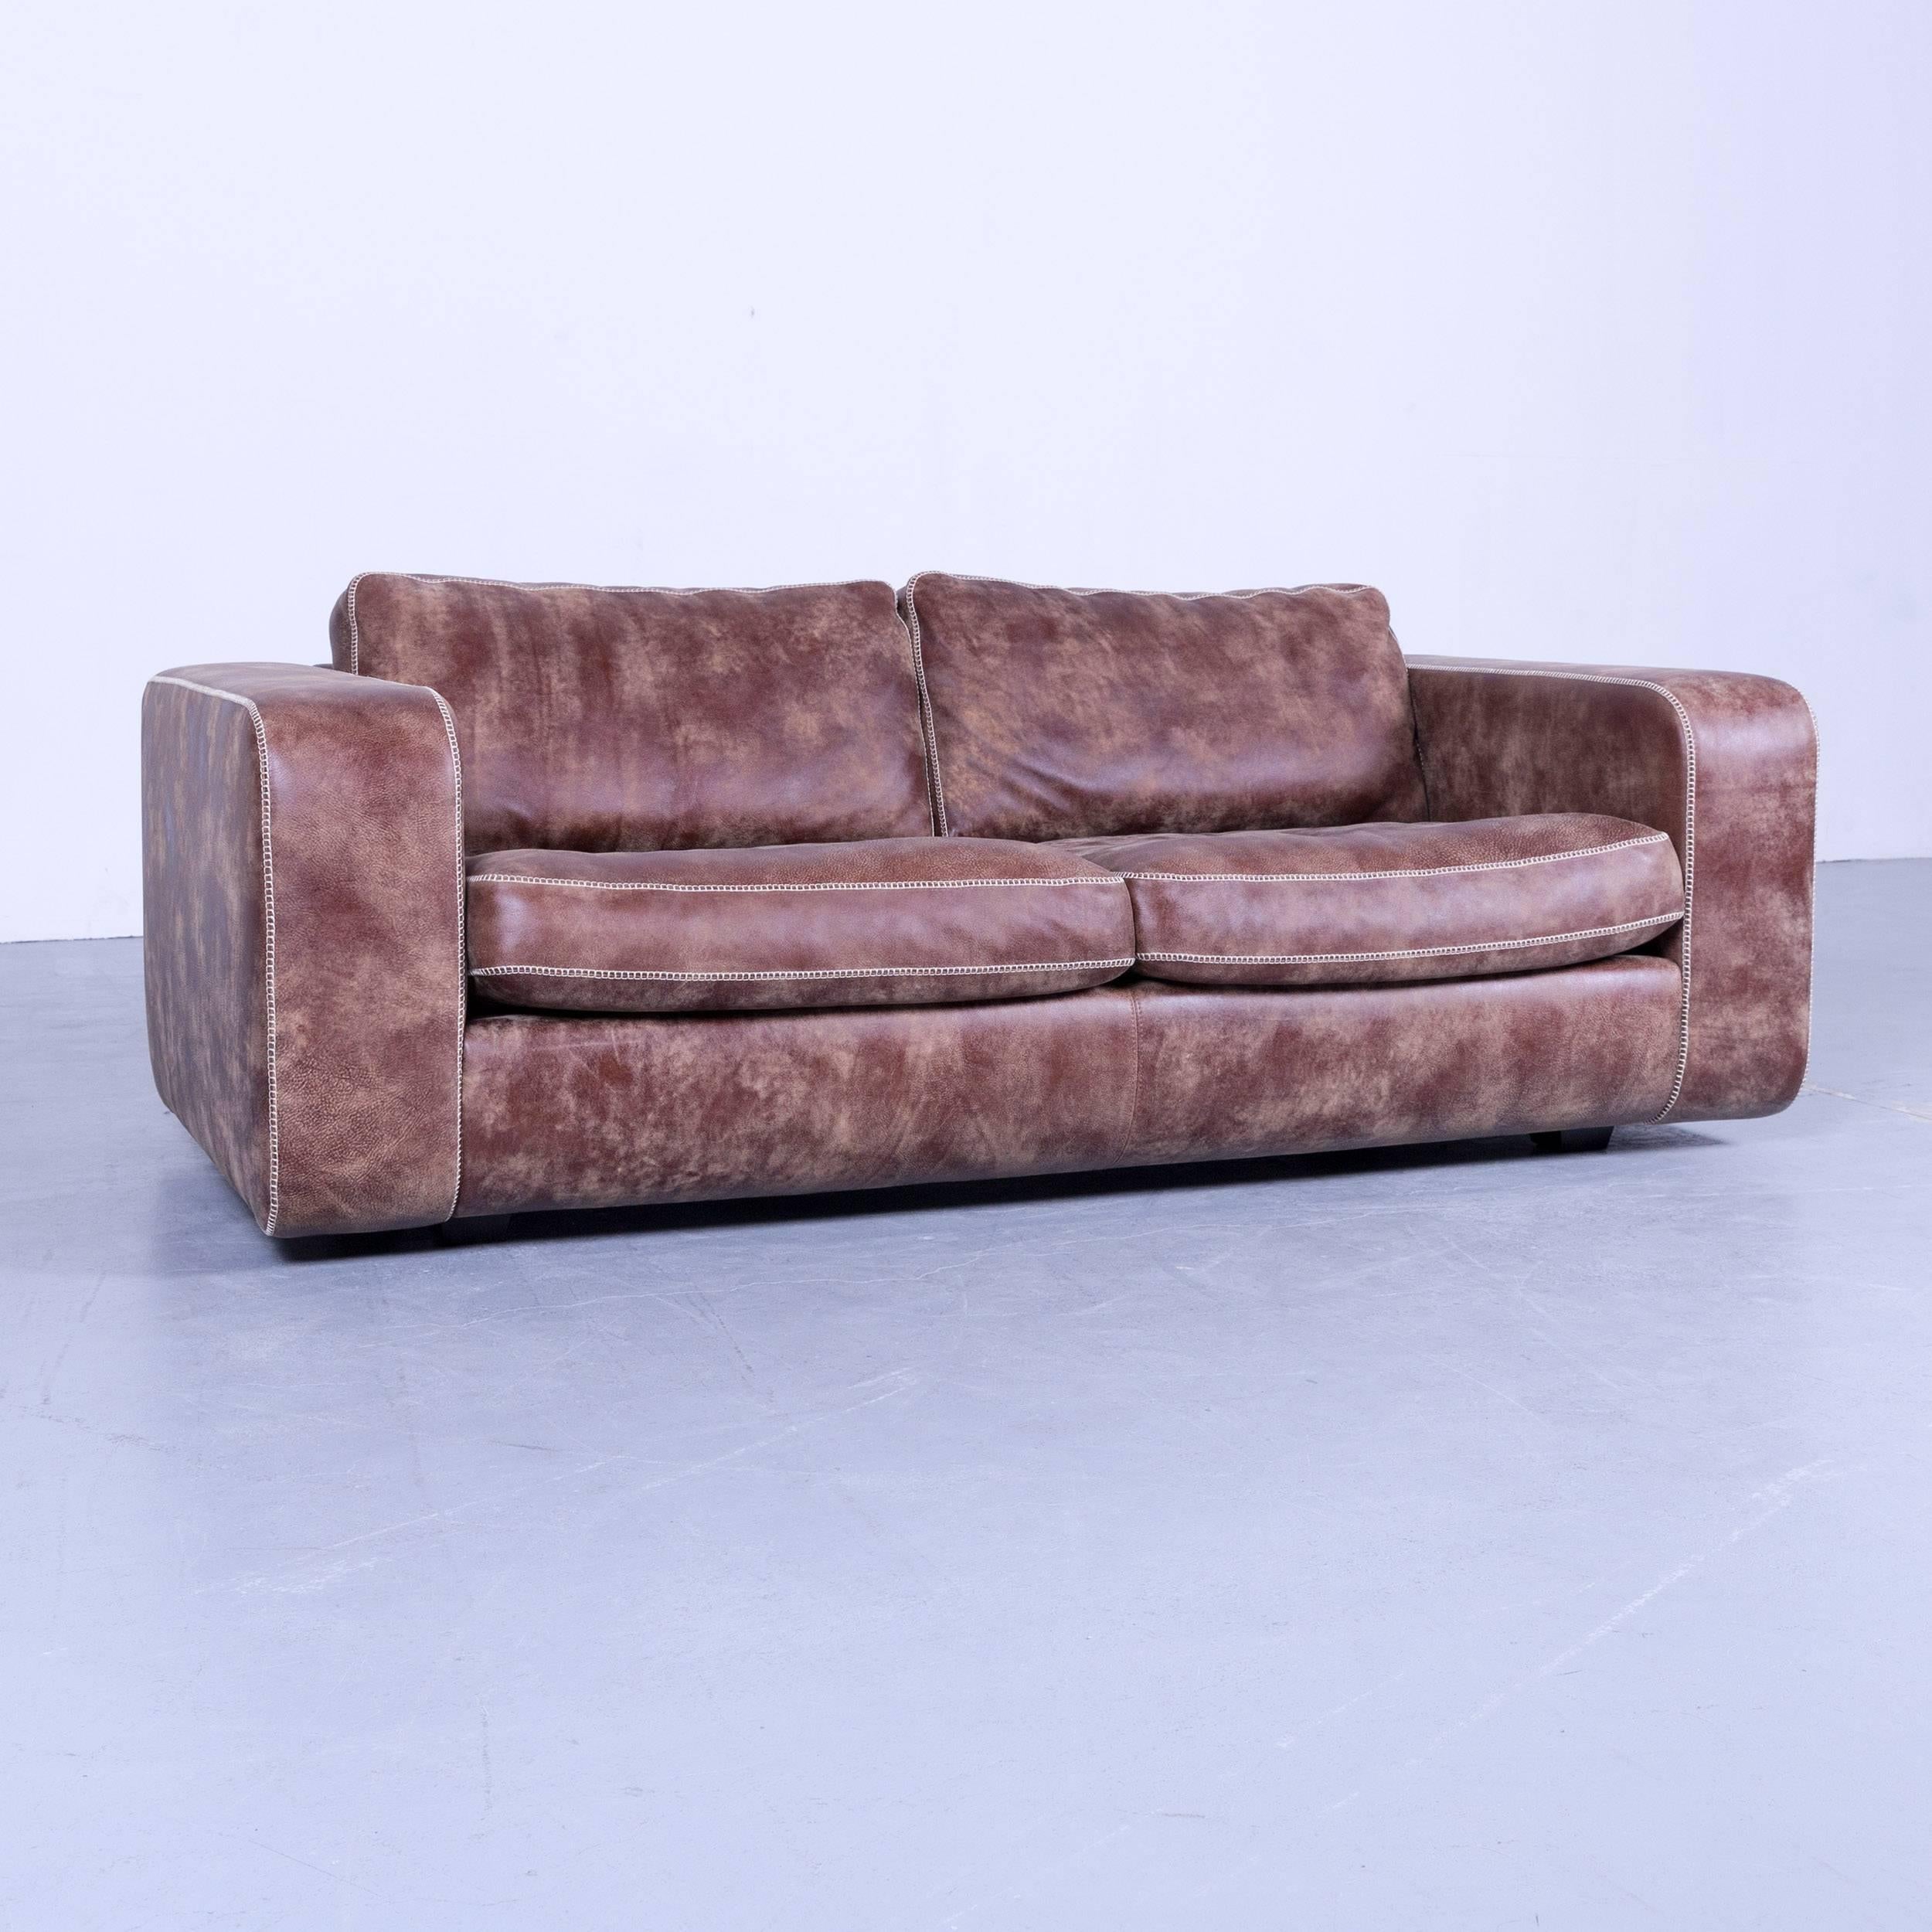 Brown colored original Machalke designer leather sofa in a minimalistic and modern design, made for pure comfort and flexibility.